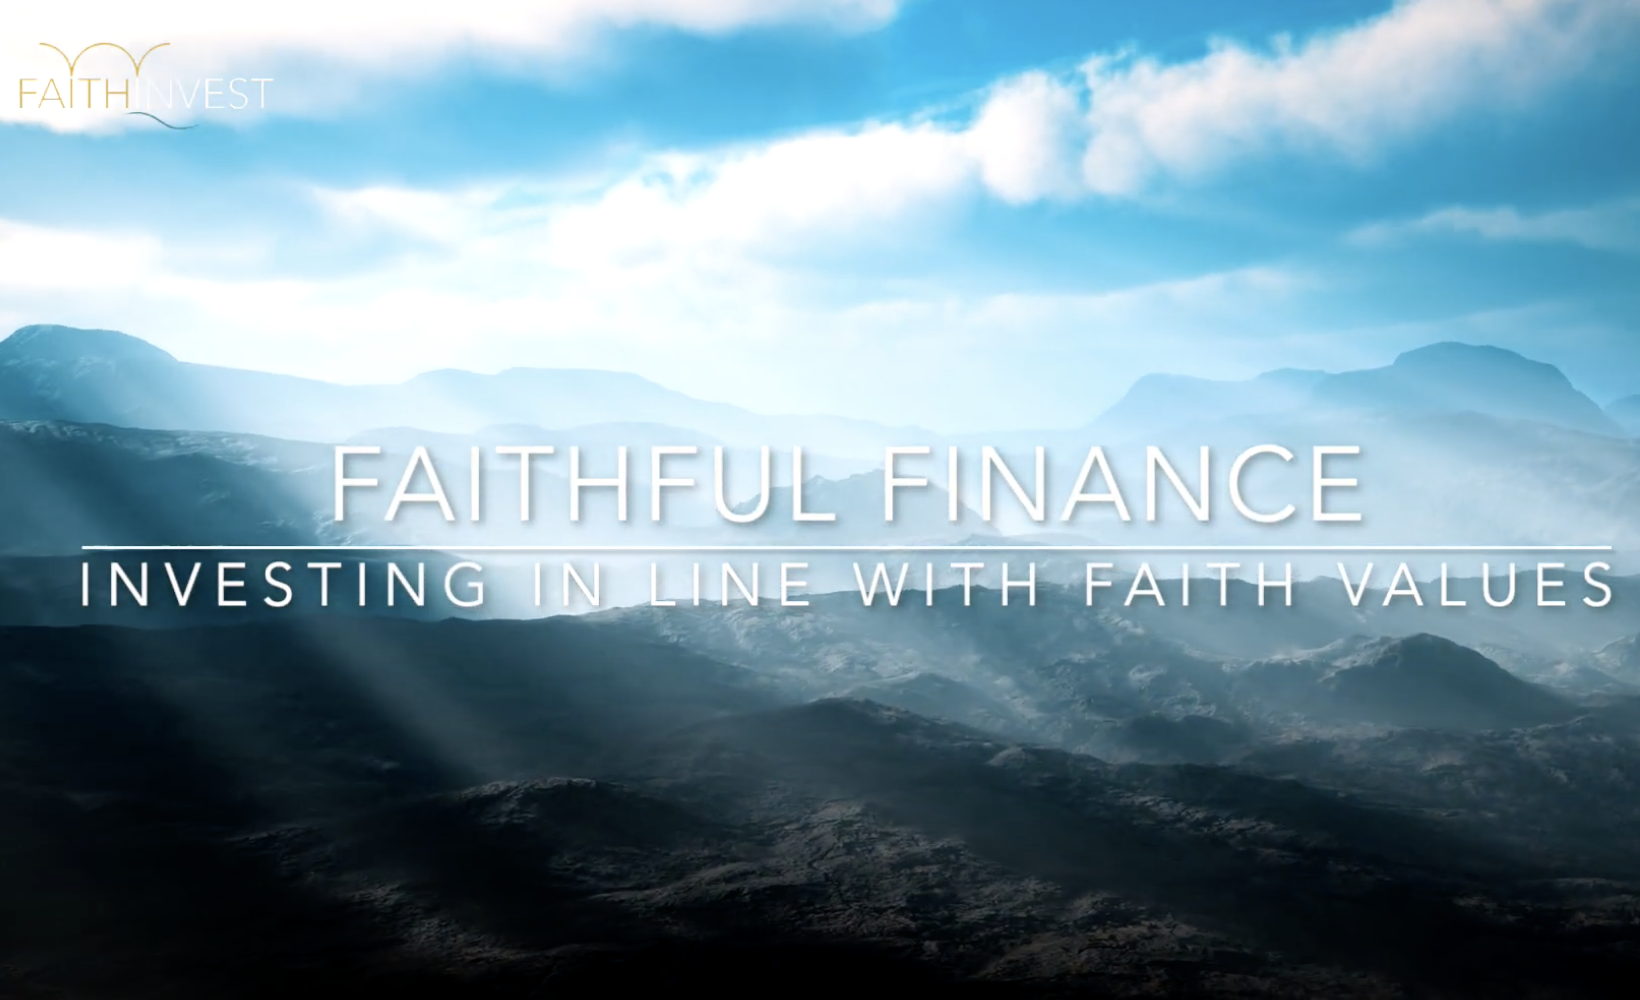 A poster of the Faithful Finance